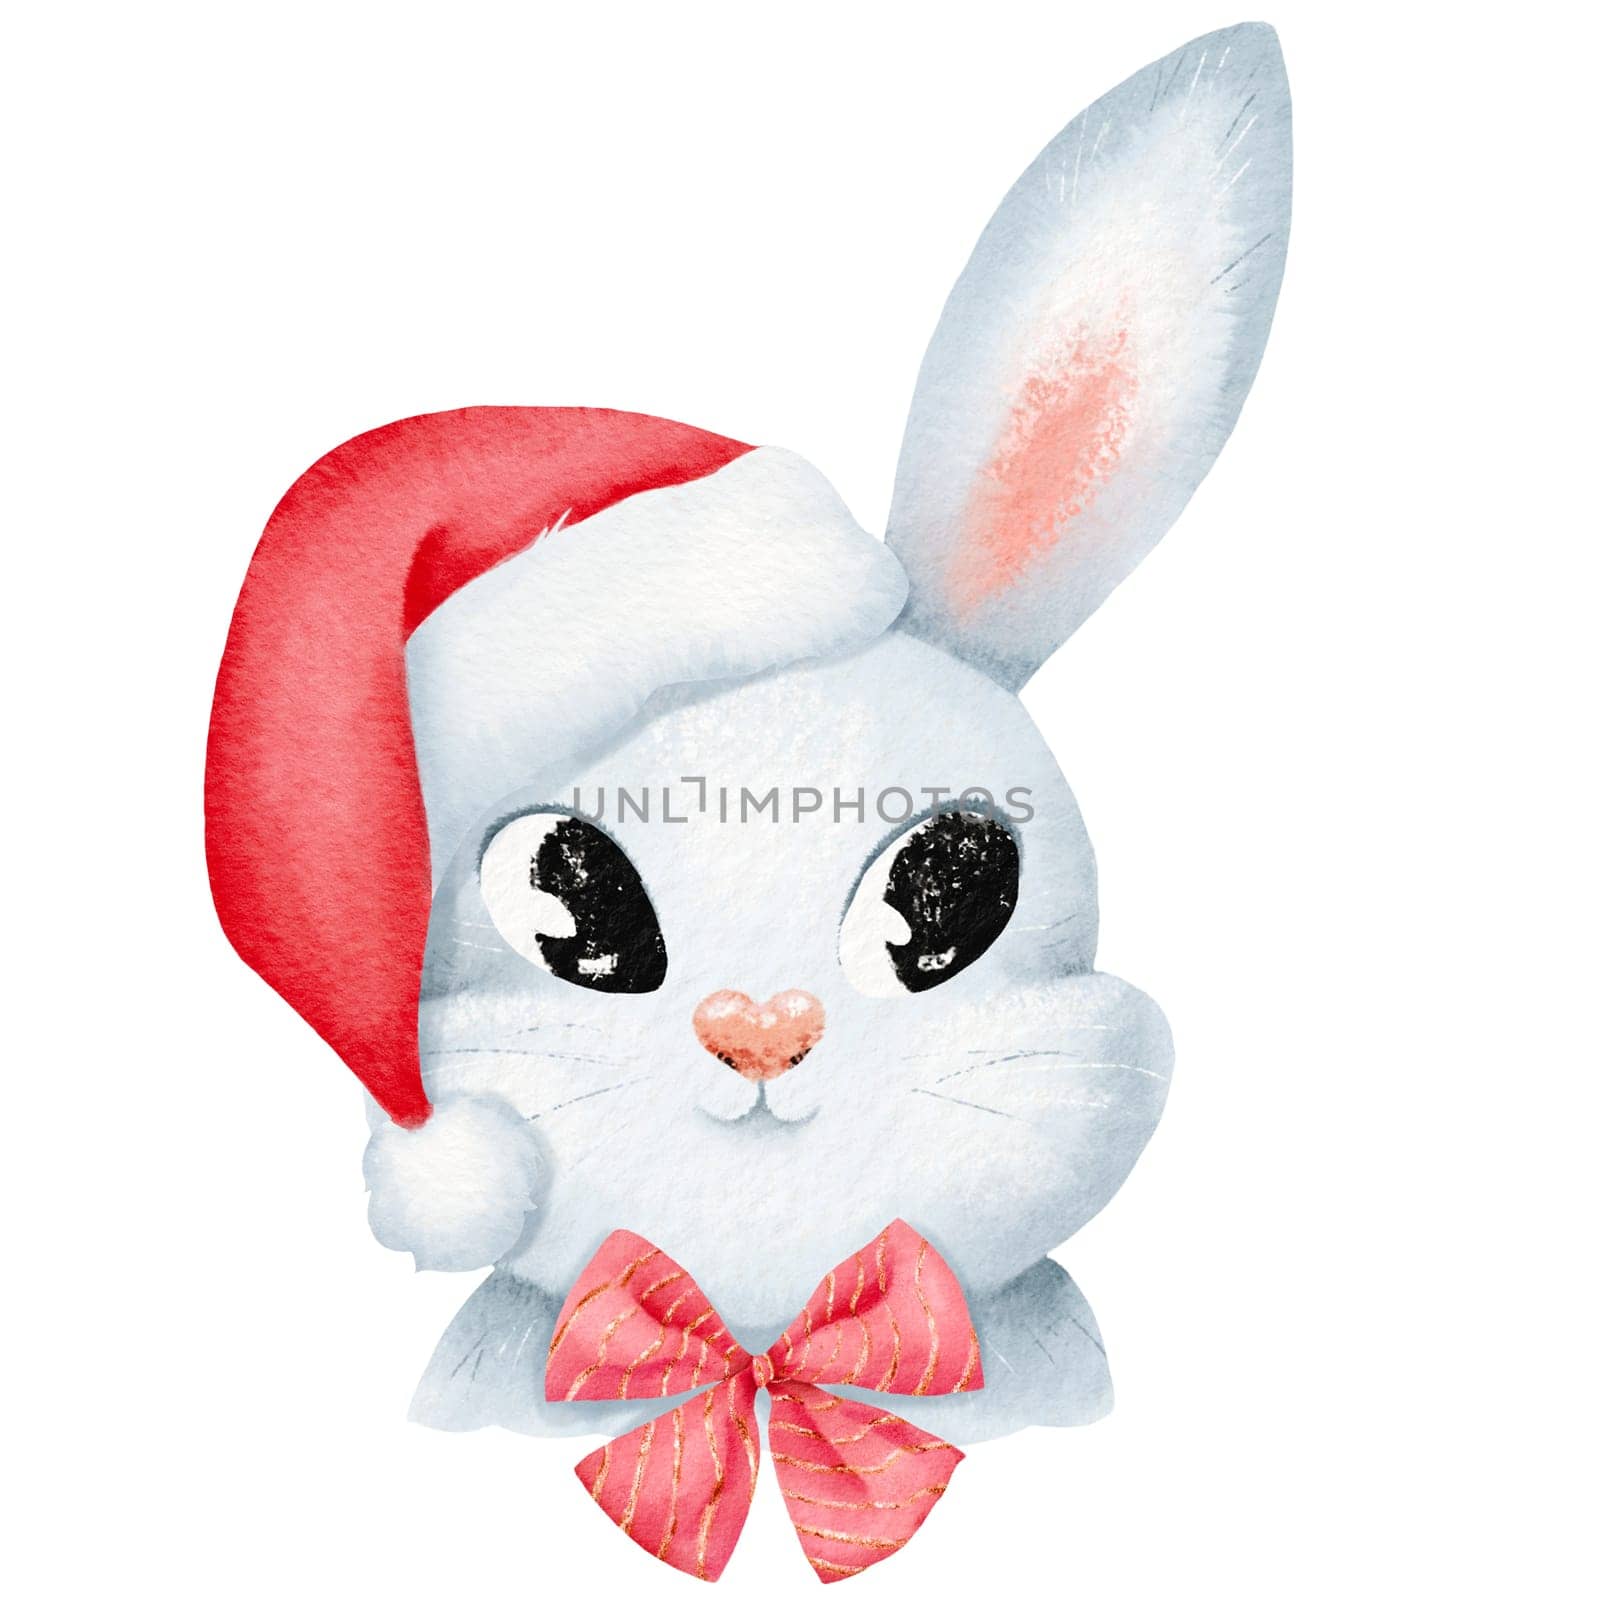 Christmas composition. Cute rabbit in a red Santa hat with a holiday bow. Cartoon rabbit portrait. For New Year's and Christmas cards, invites, stickers, design. Isolated watercolor illustration.